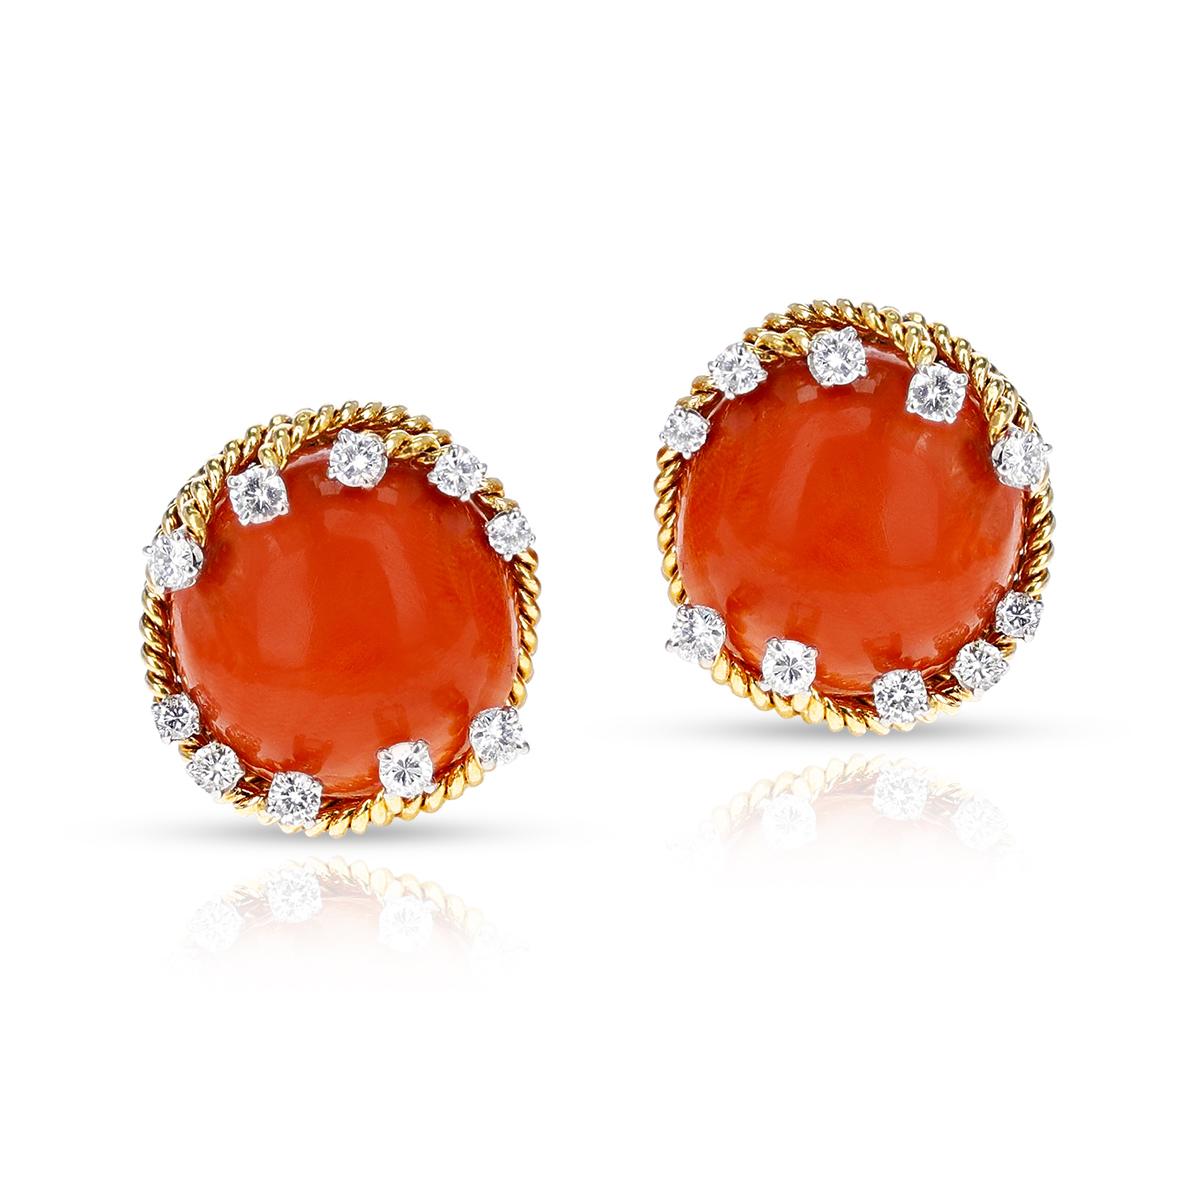 A stunning pair of David Webb Coral Cabochon and Round Diamond Earrings made in 18 Karat Yellow Gold. The size of the cabochon is 19 MM. The total weight of the earring is 19.98 grams. 
